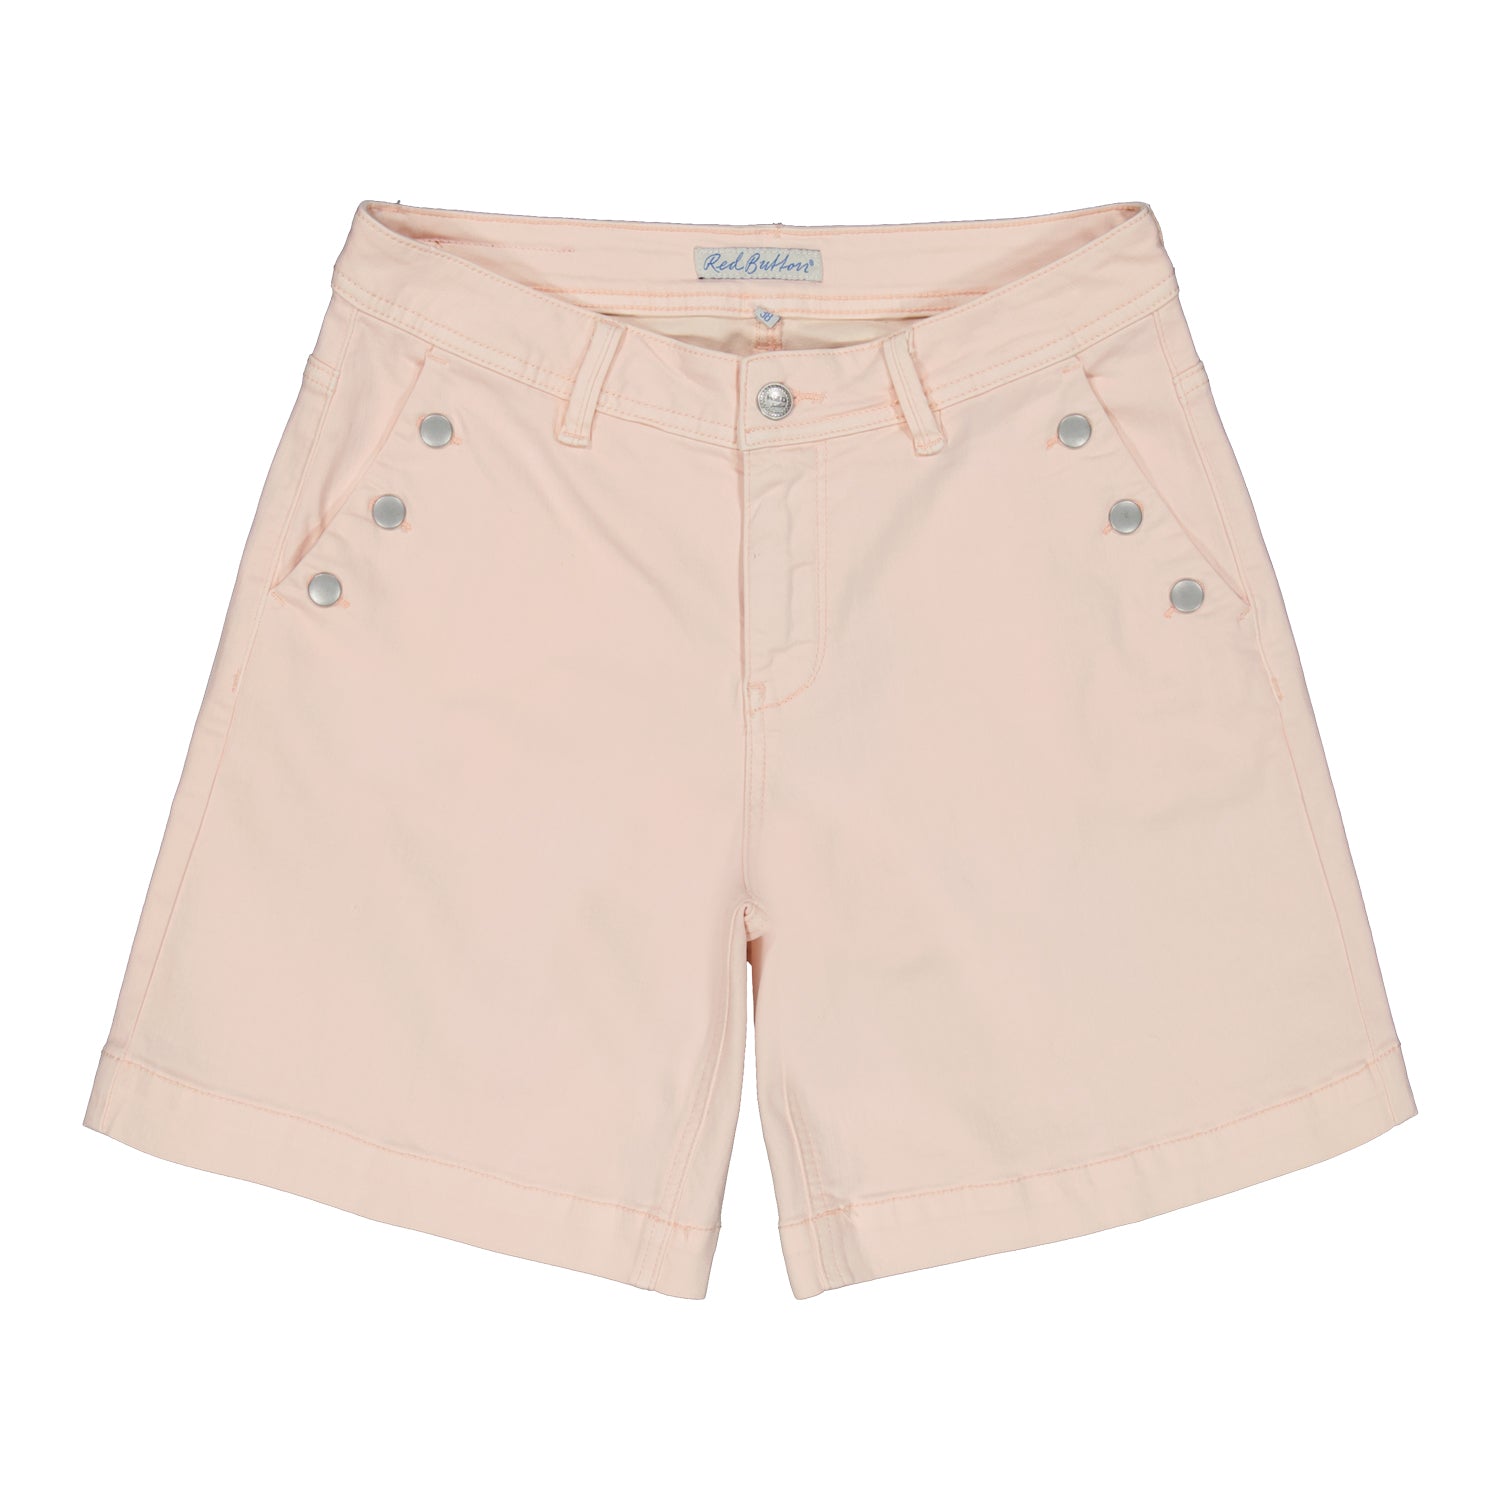 BEBE Cotton Blend Shorts in Blush or Stone